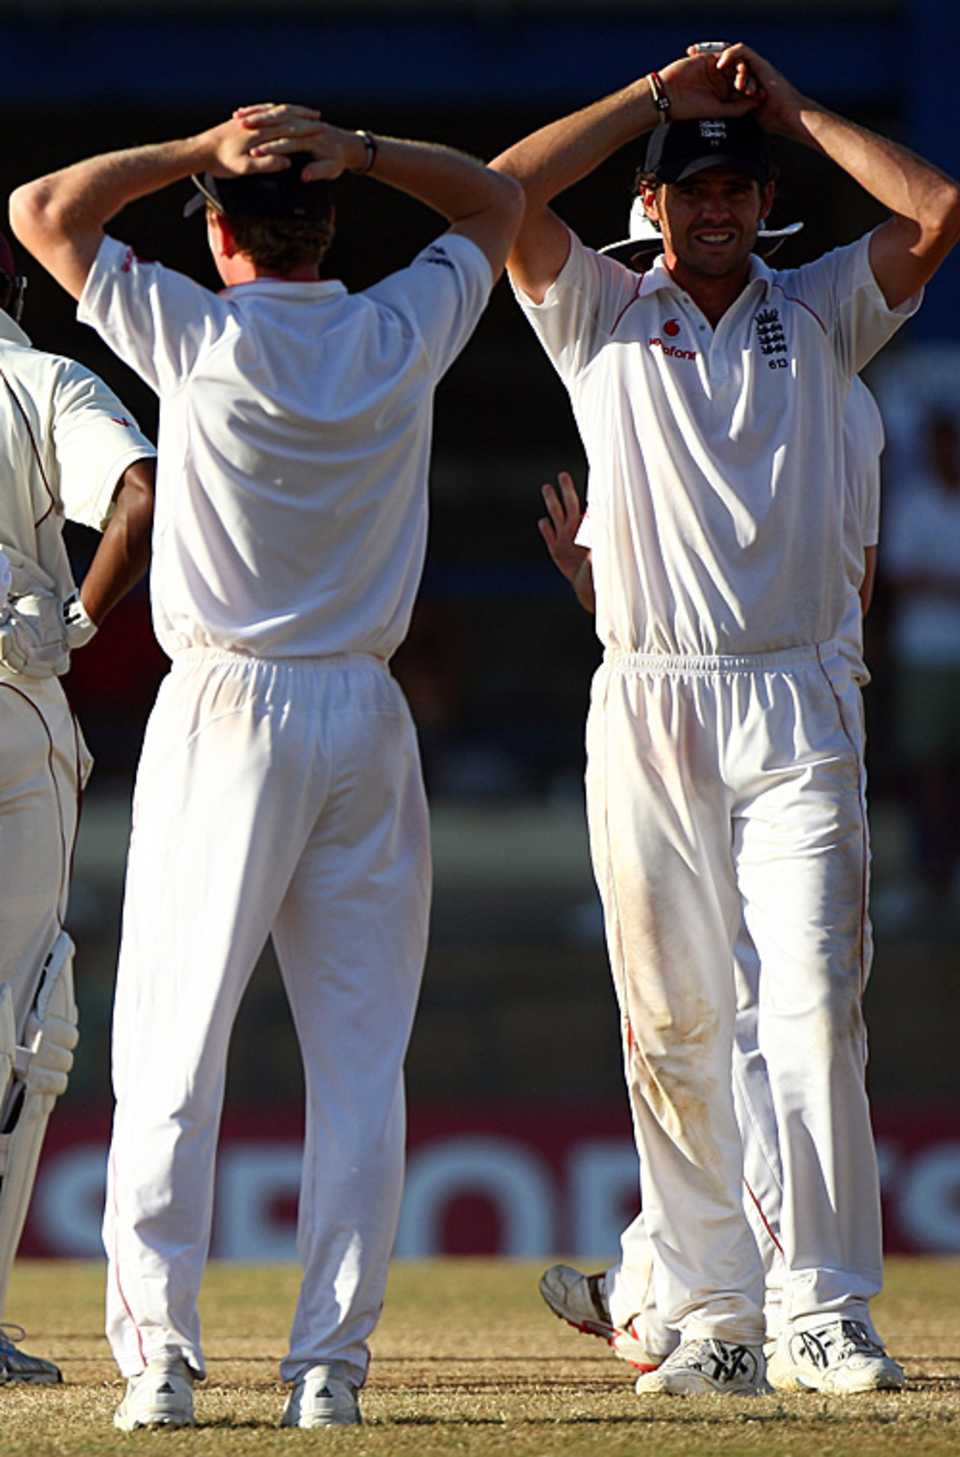 James Anderson puts his hands on his head as England are condemned to a series defeat, West Indies v England, 5th Test, Trinidad, March 10, 2009